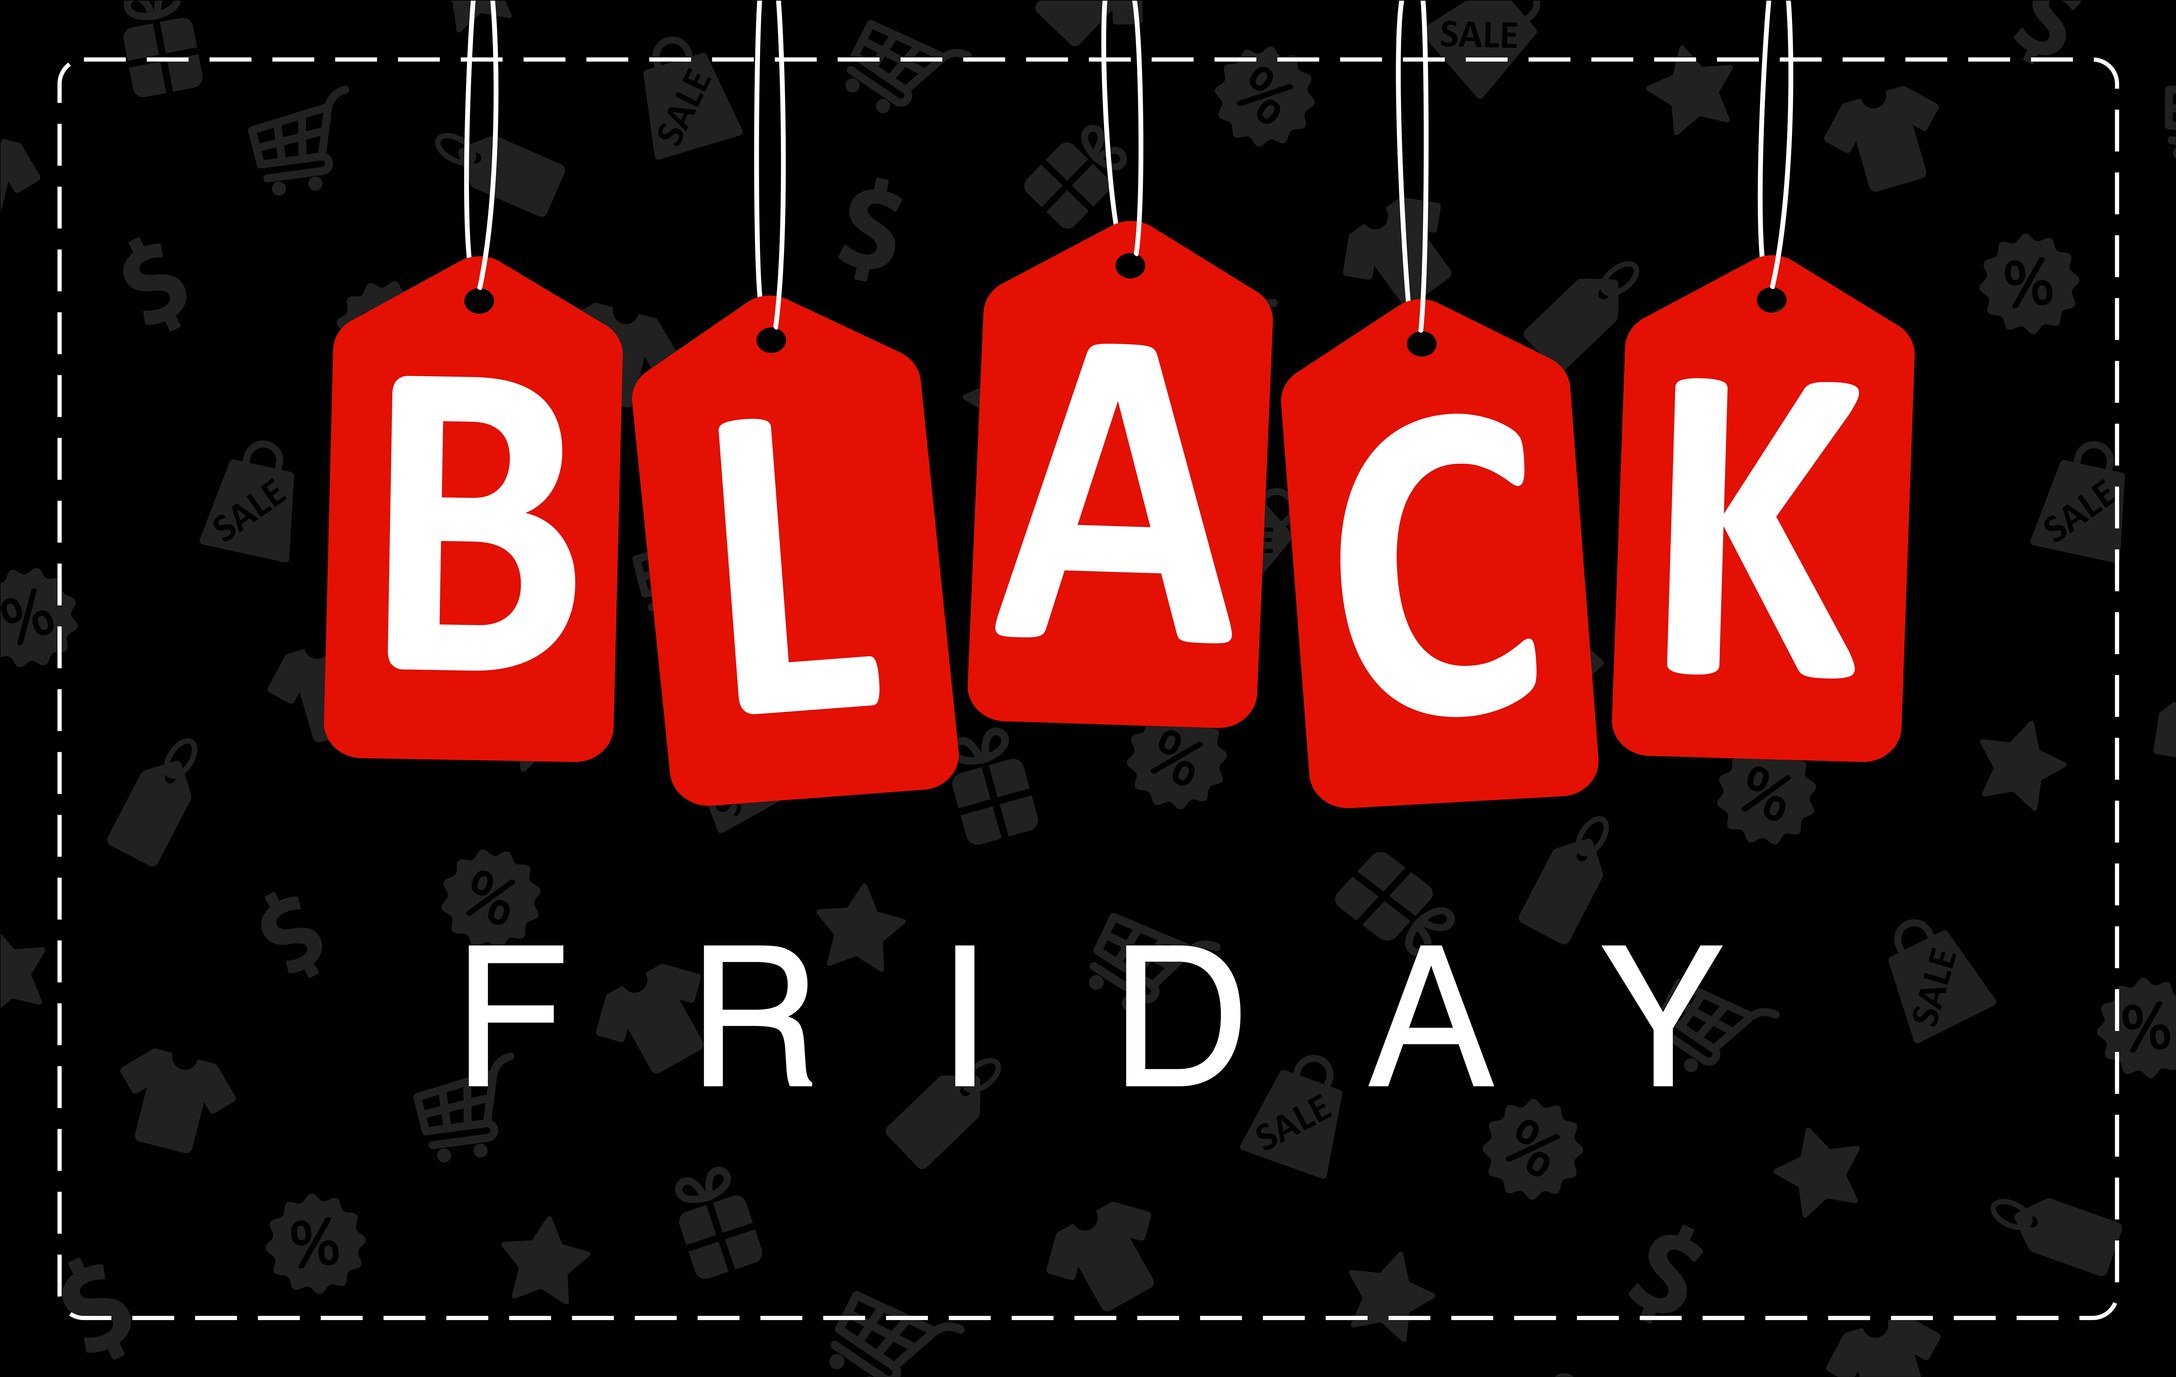 Black Friday / Cyber Monday 2018 – Save Big with these Deals